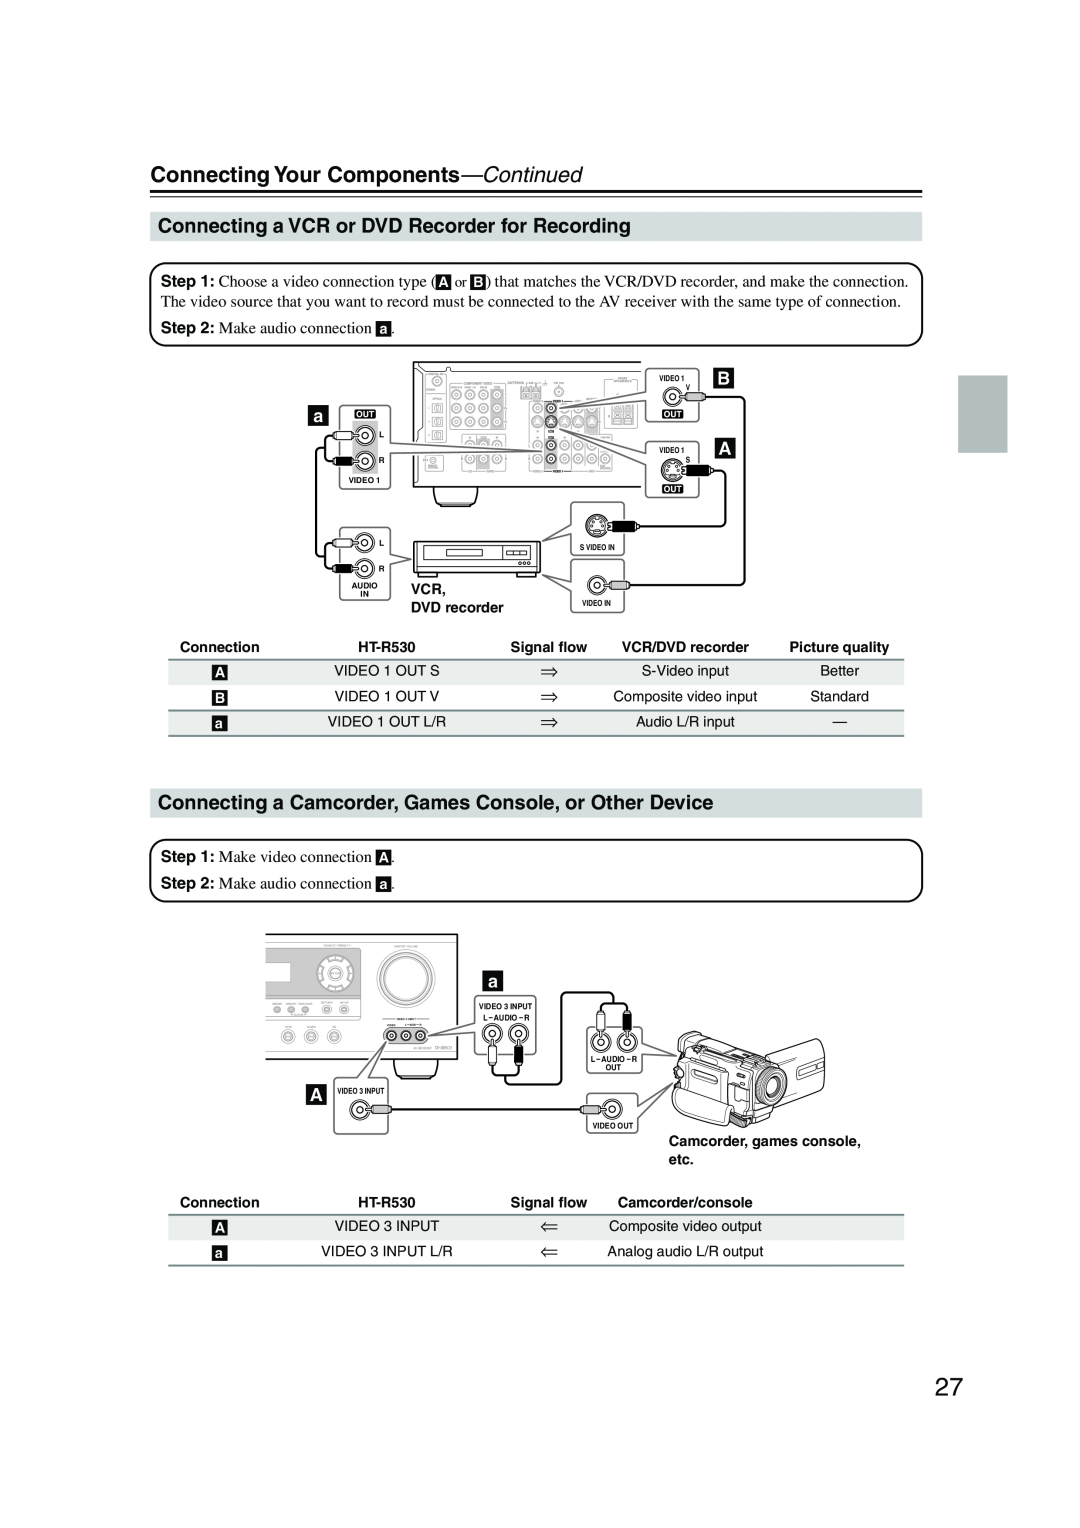 Onkyo HT-S780 instruction manual Connecting a VCR or DVD Recorder for Recording, Connecting Your Components—Continued 